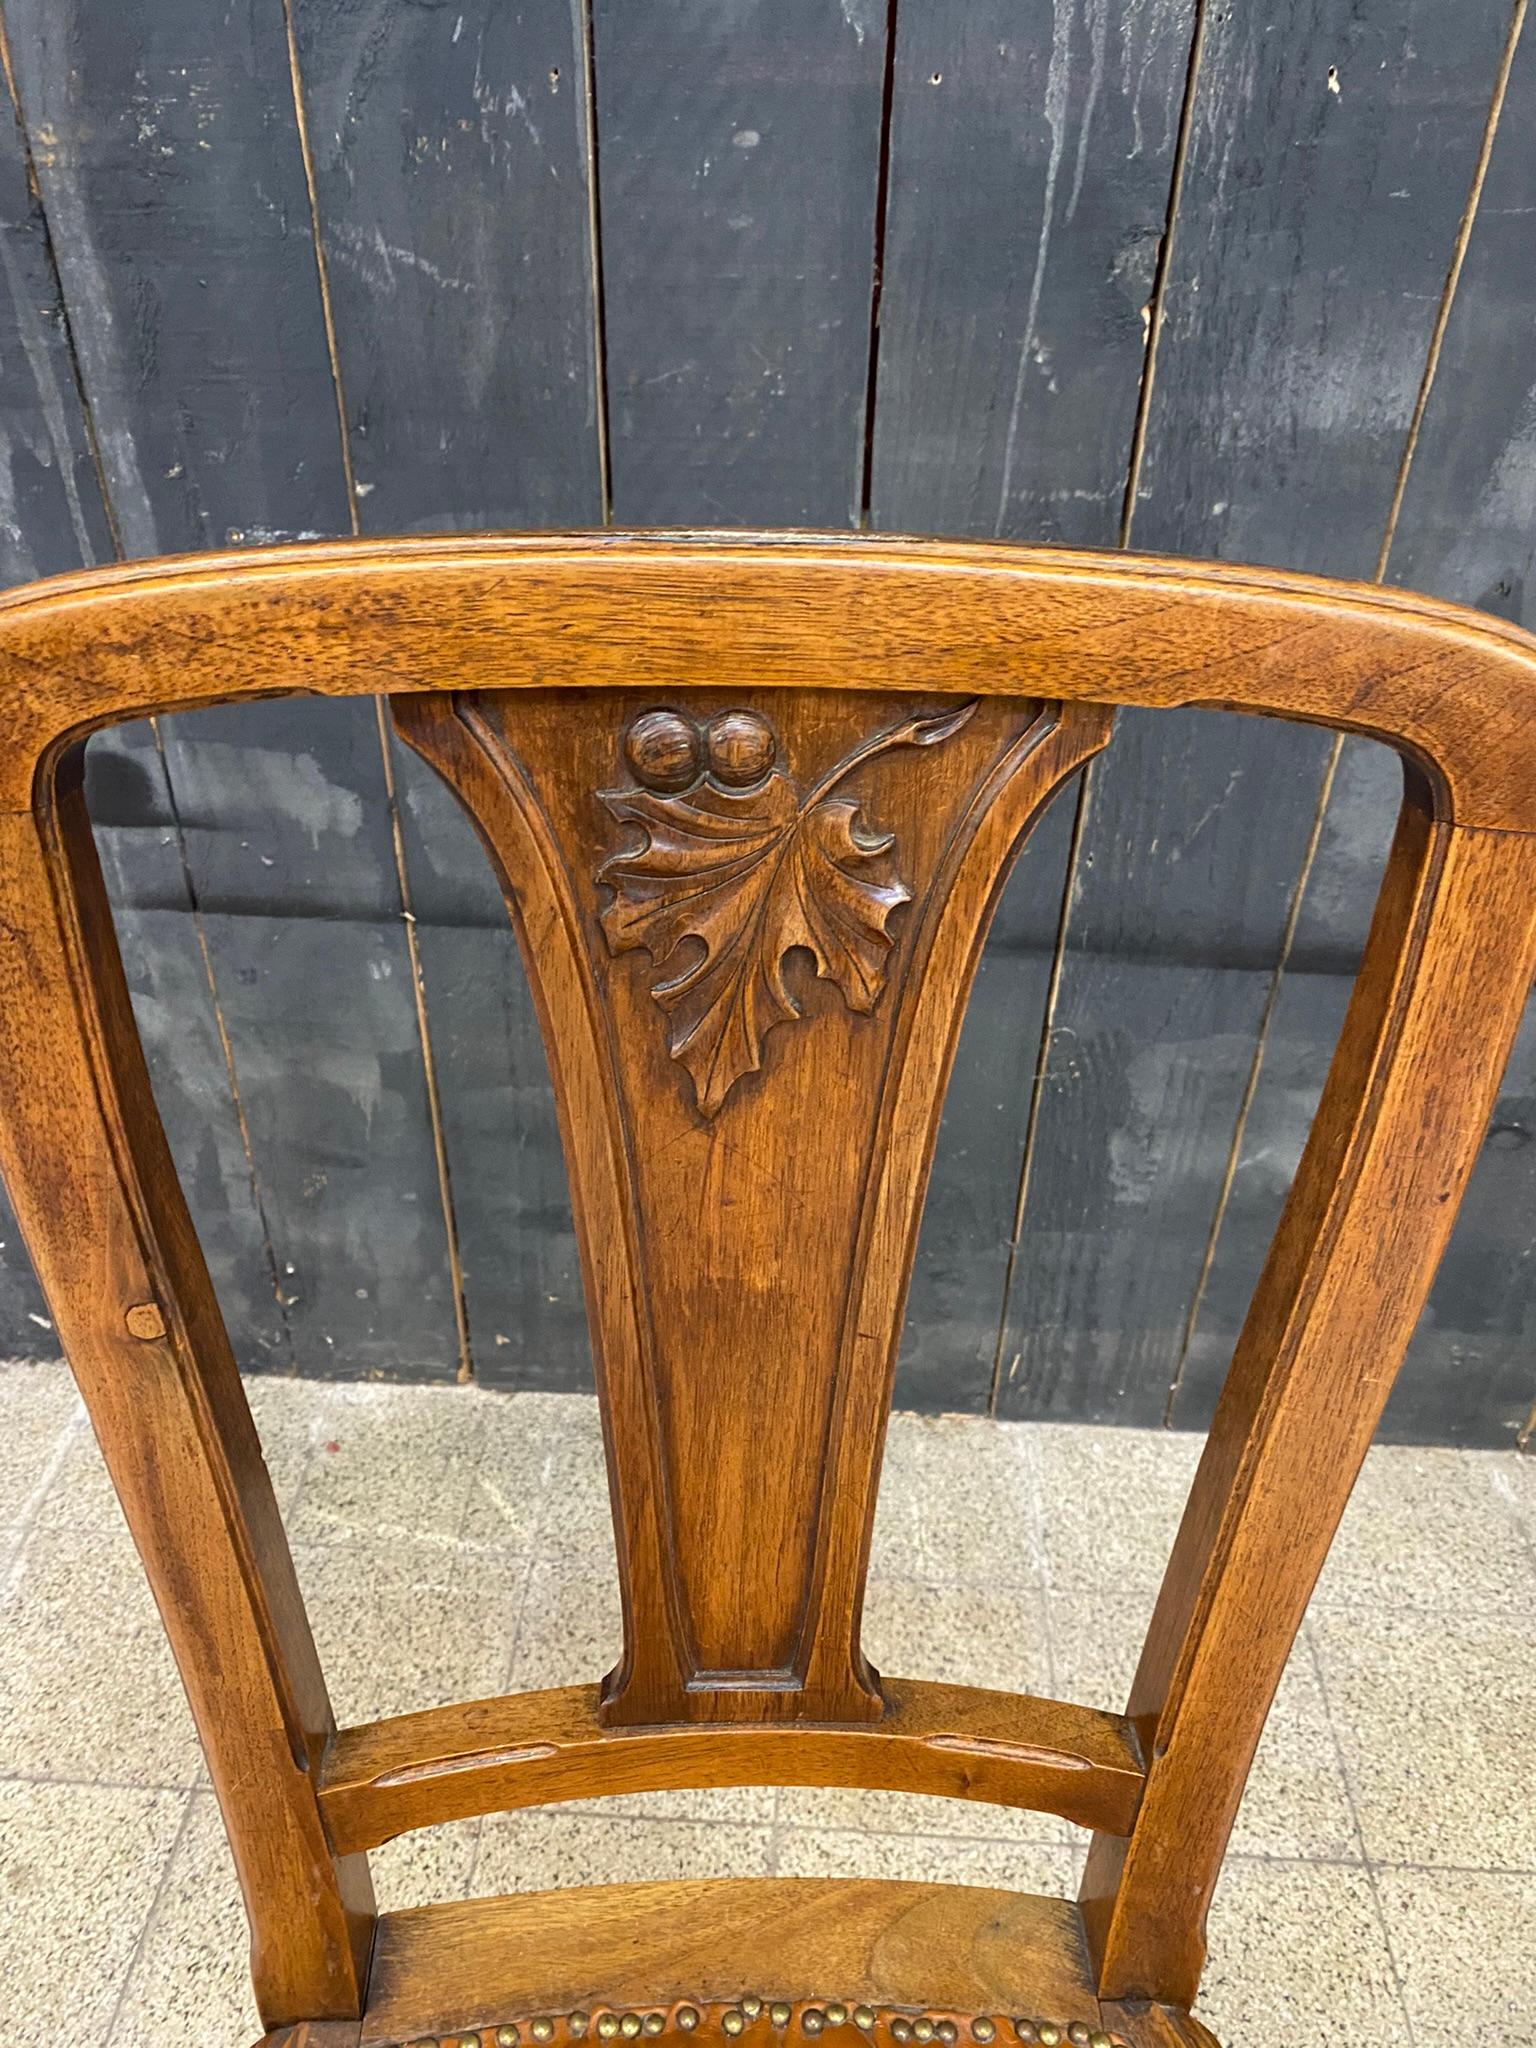 Attributed to Gauthier-Poinsignon & Cie, 6 Art Nouveau Chairs Leather Seats 1